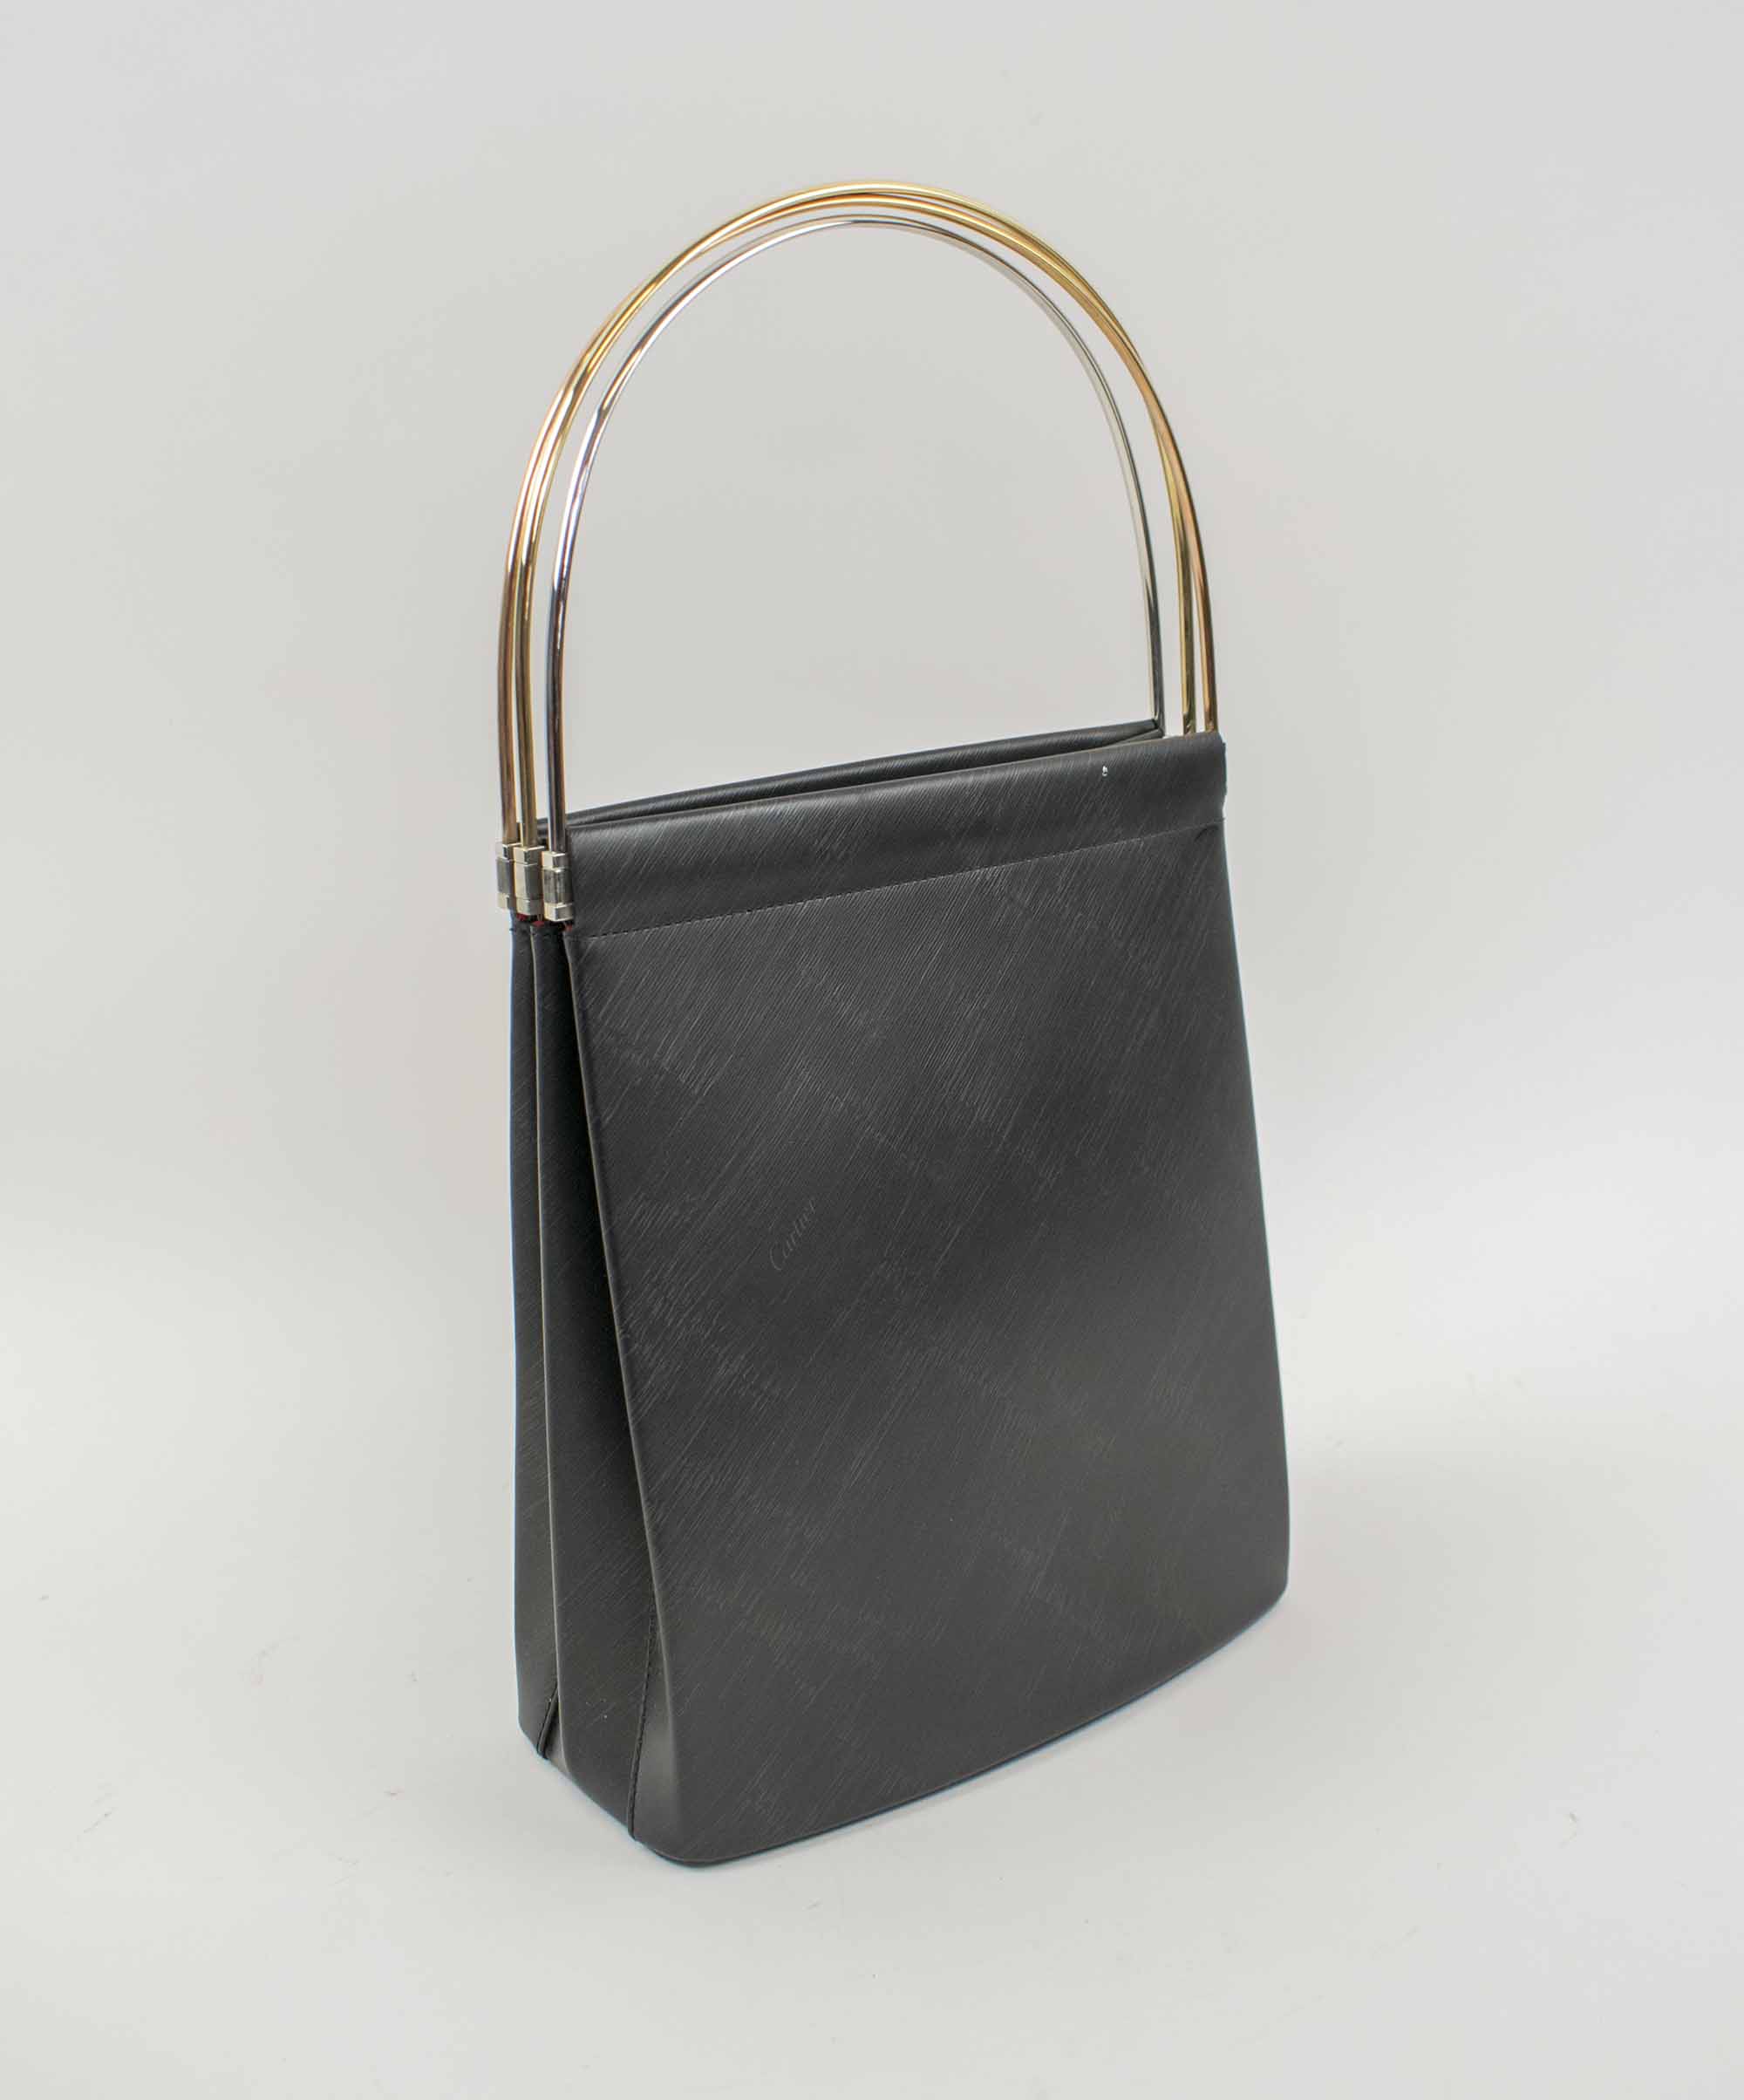 CARTIER VINTAGE TRINITY BAG, black leather with three iconic round top ...